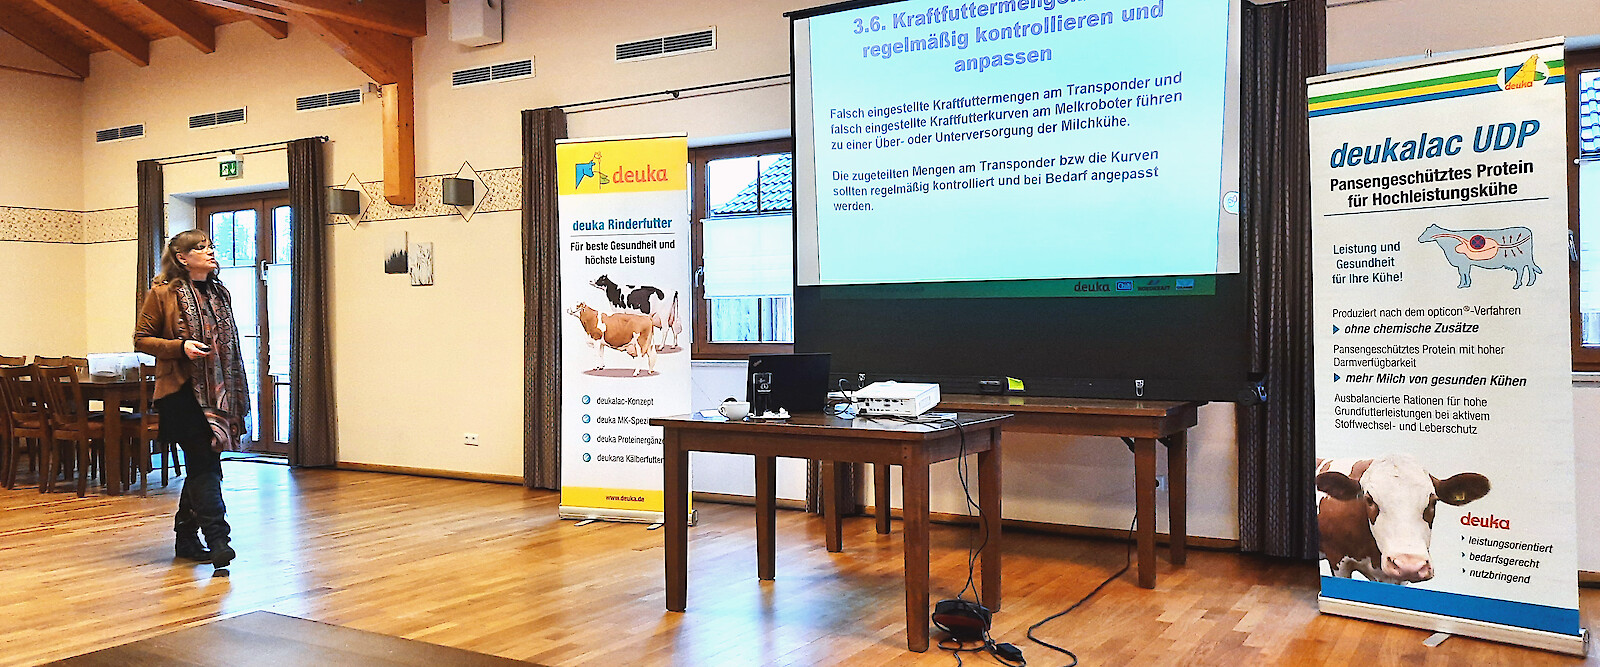 How to feed cattle - speaker Gaby Harr gives insights into correct cattle feeding (© Deutsche Tiernahrung Cremer).